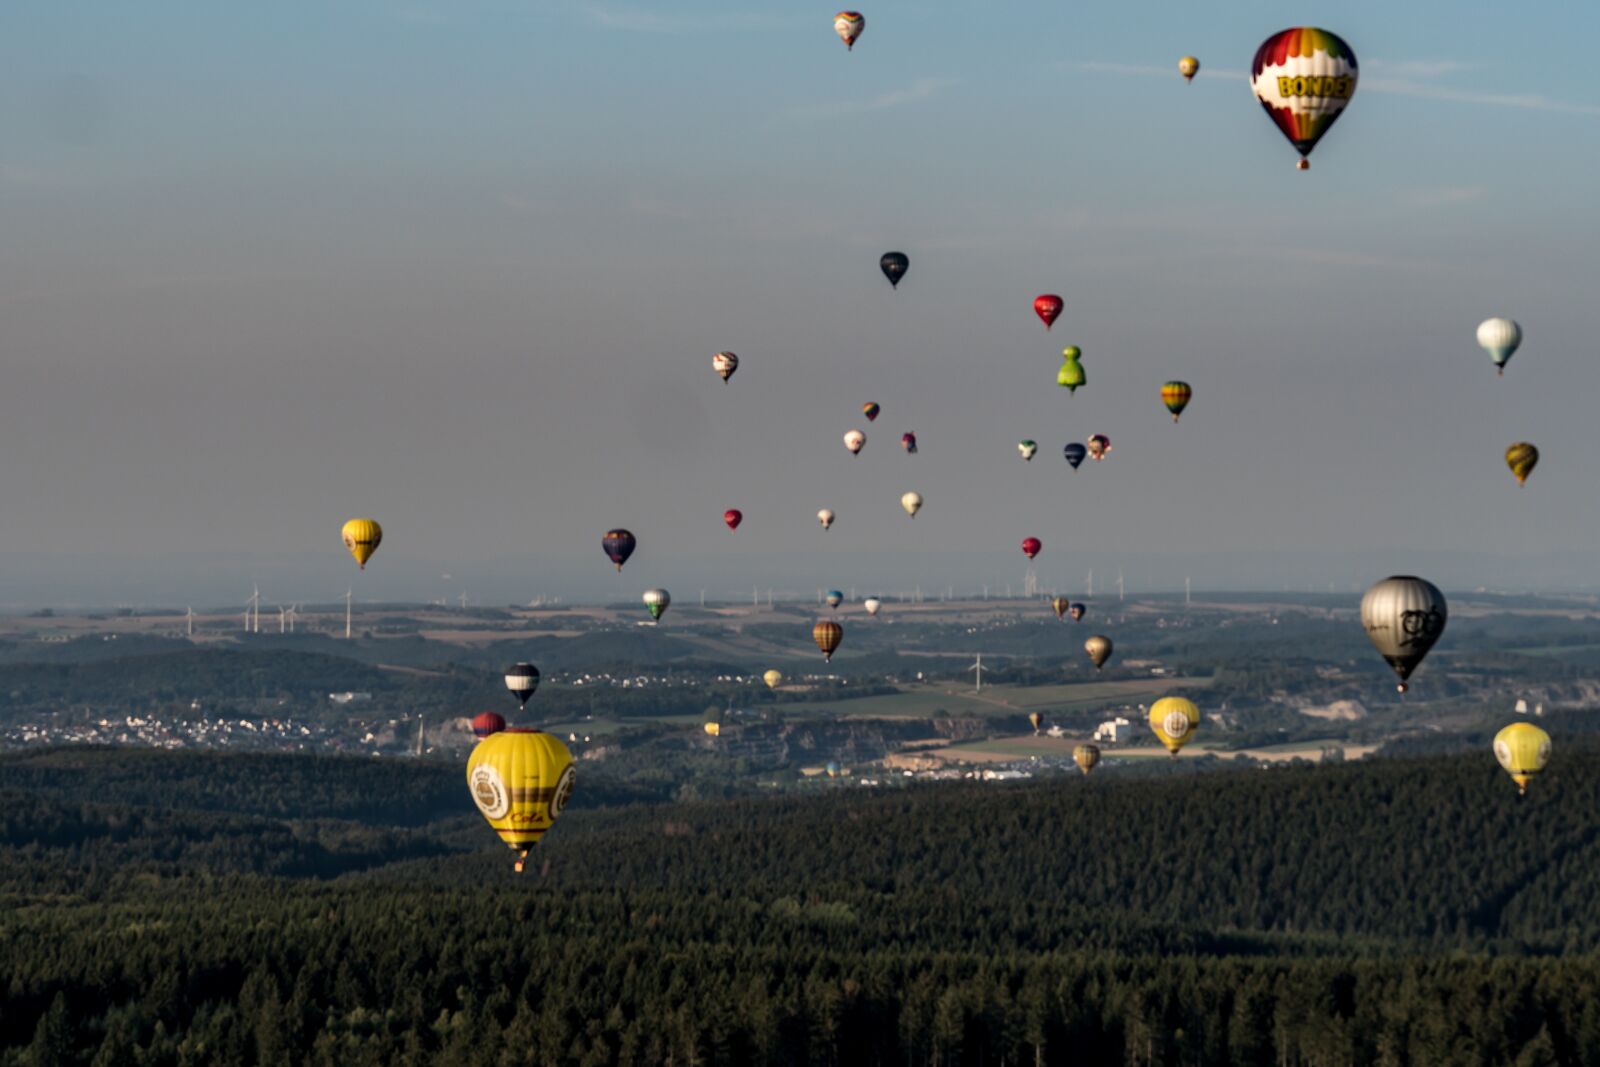 Sony a6300 + Tamron 28-75mm F2.8 Di III RXD sample photo. Sky, balloon, hot air photography